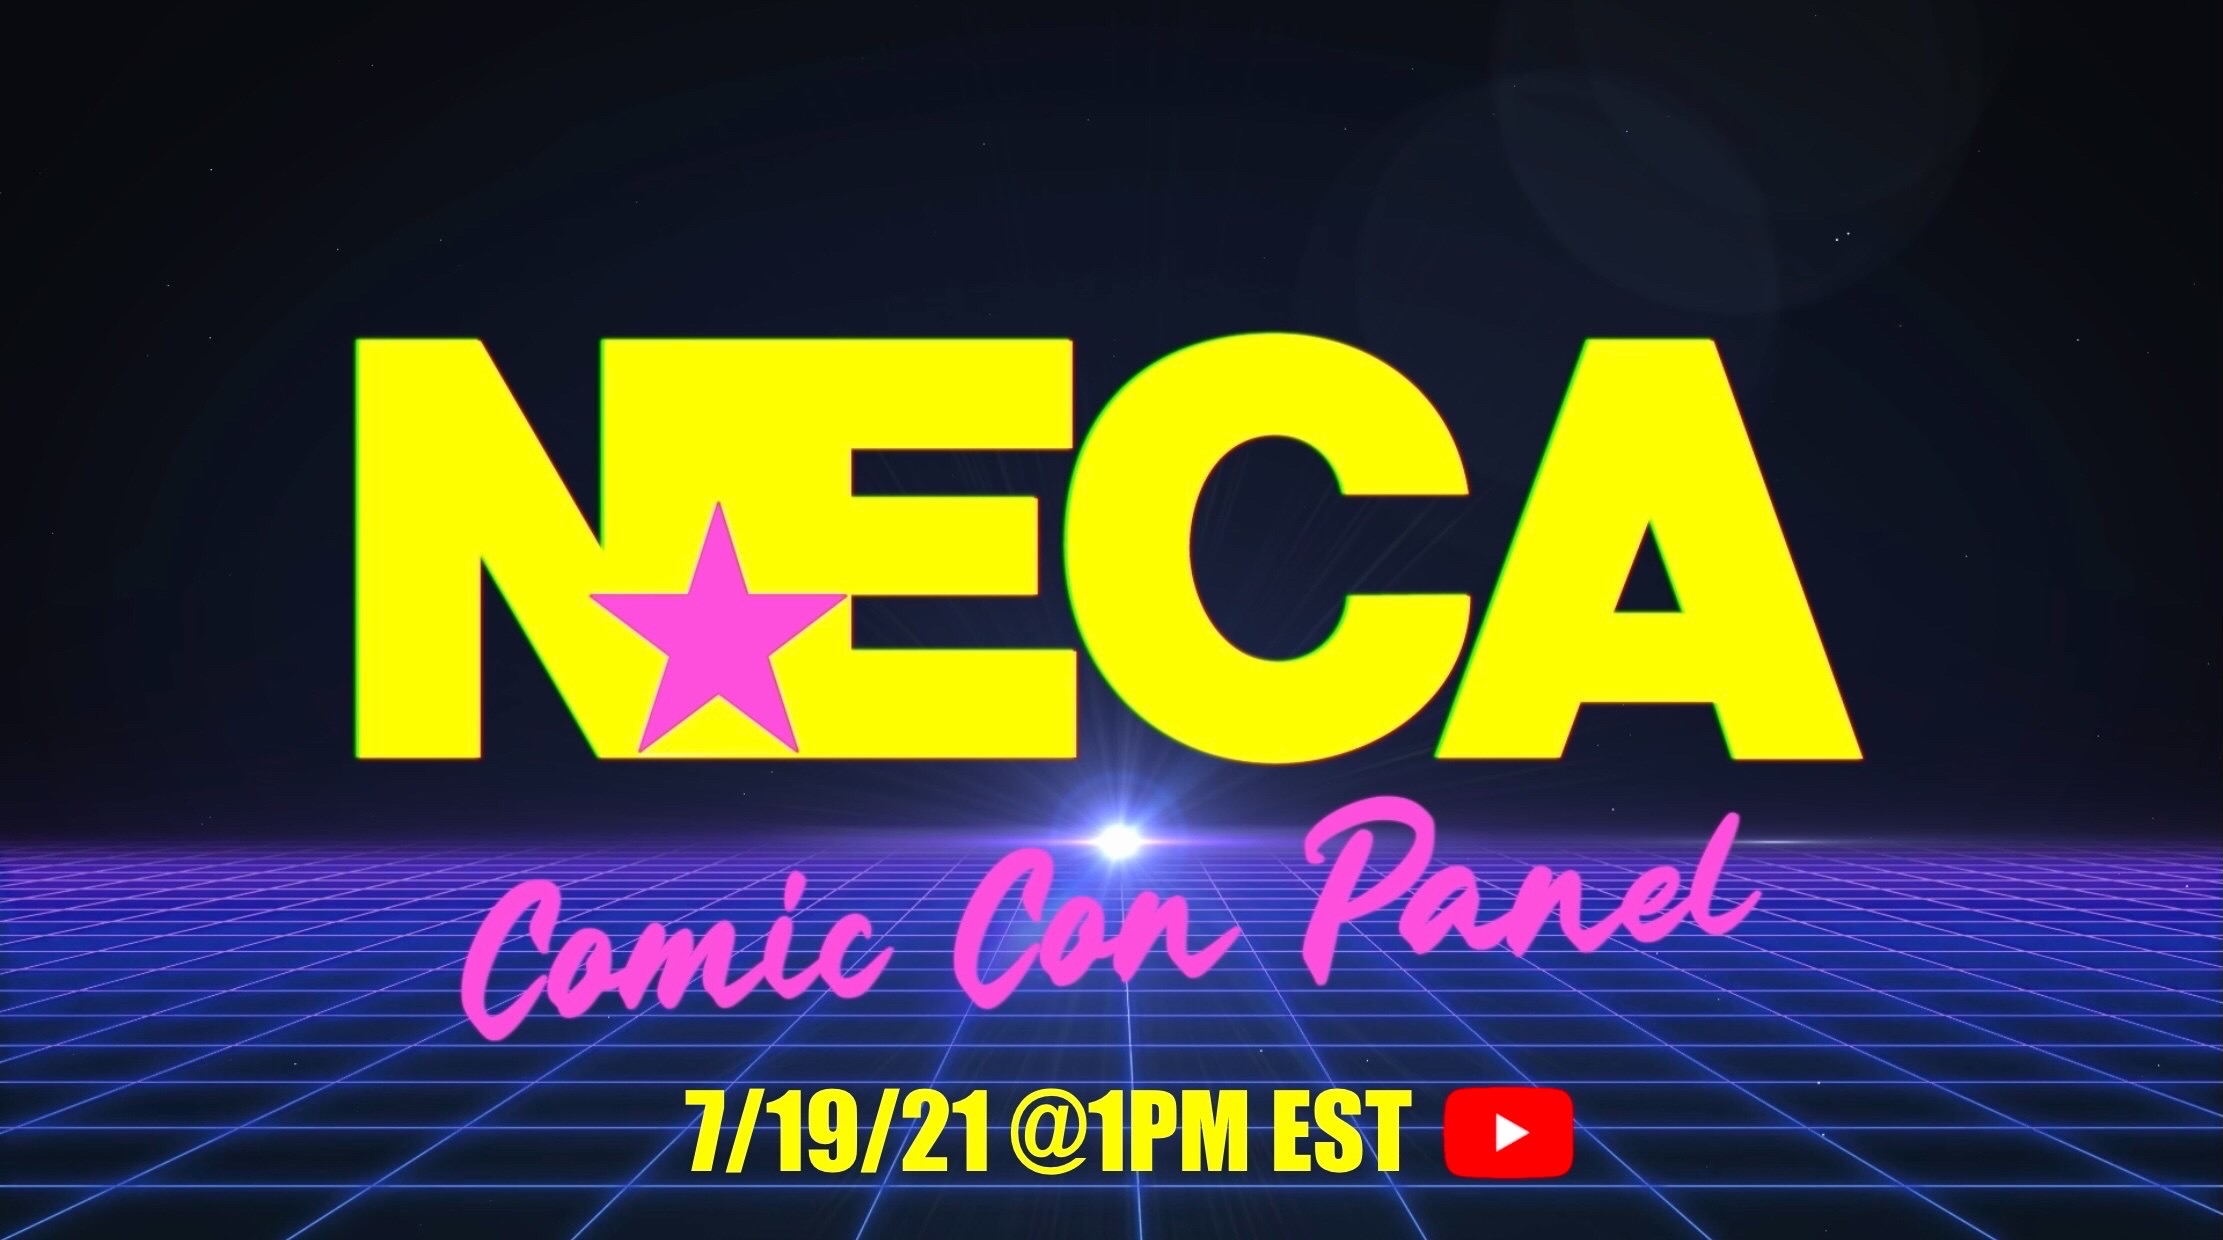 NECAOnline.com | NECA Comic Con Online Panel - July 19, 2021 at 1 PM Eastern on YouTube!